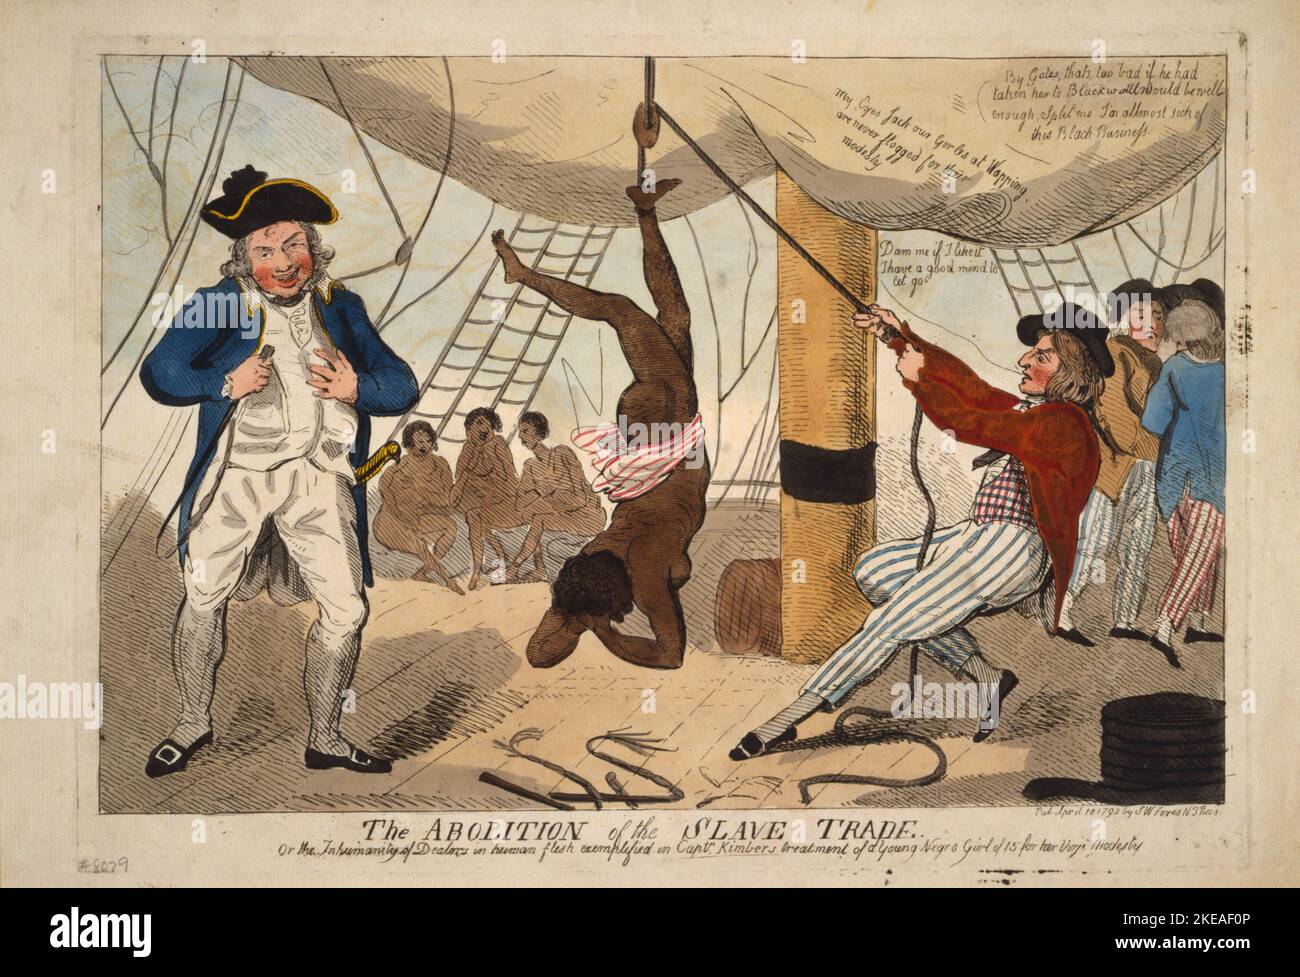 Vintage illustration by Isaac Cruikshank dated April 10 1792 entitled The abolition of the slave trade Or the inhumanity of dealers in human flesh exemplified in Captain Kimber's treatment of a young Negro girl of 15 for her virjen (virgin) modesty. It shows John Kimber captain of the slave ship Recovery from Bristol torturing and killing a young girl. He was tried for murder in 1792 and though aquitted it brought about the British parliament prohibiting slavery in its colonies by the Slave Trade Act 1807 Stock Photo